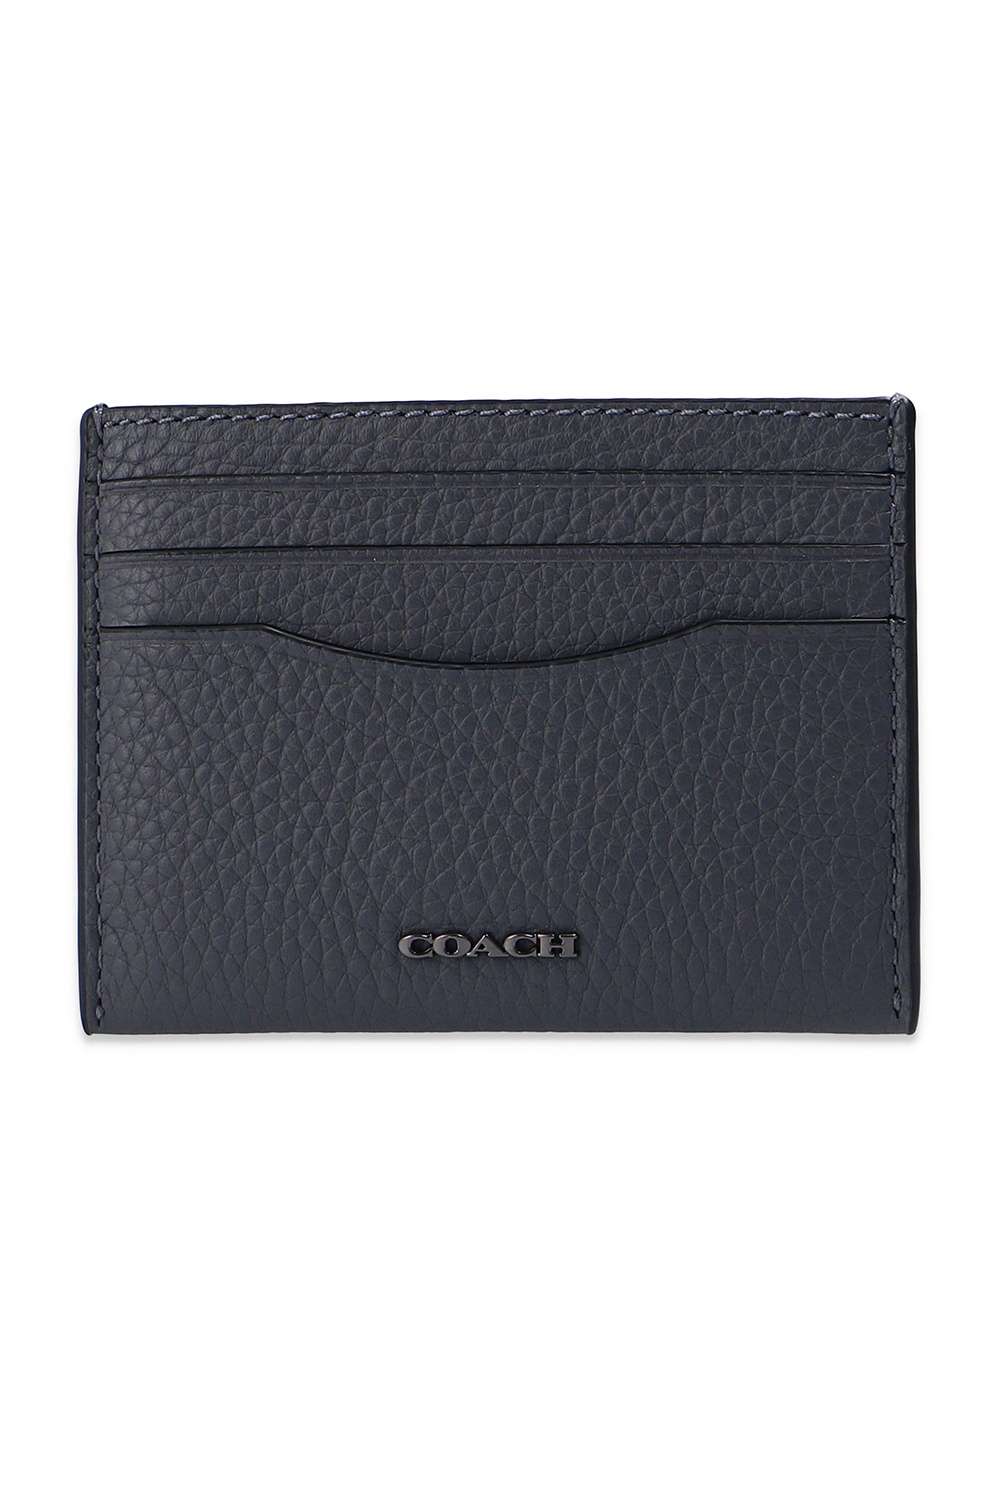 Coach Card case with logo, Men's Accessories